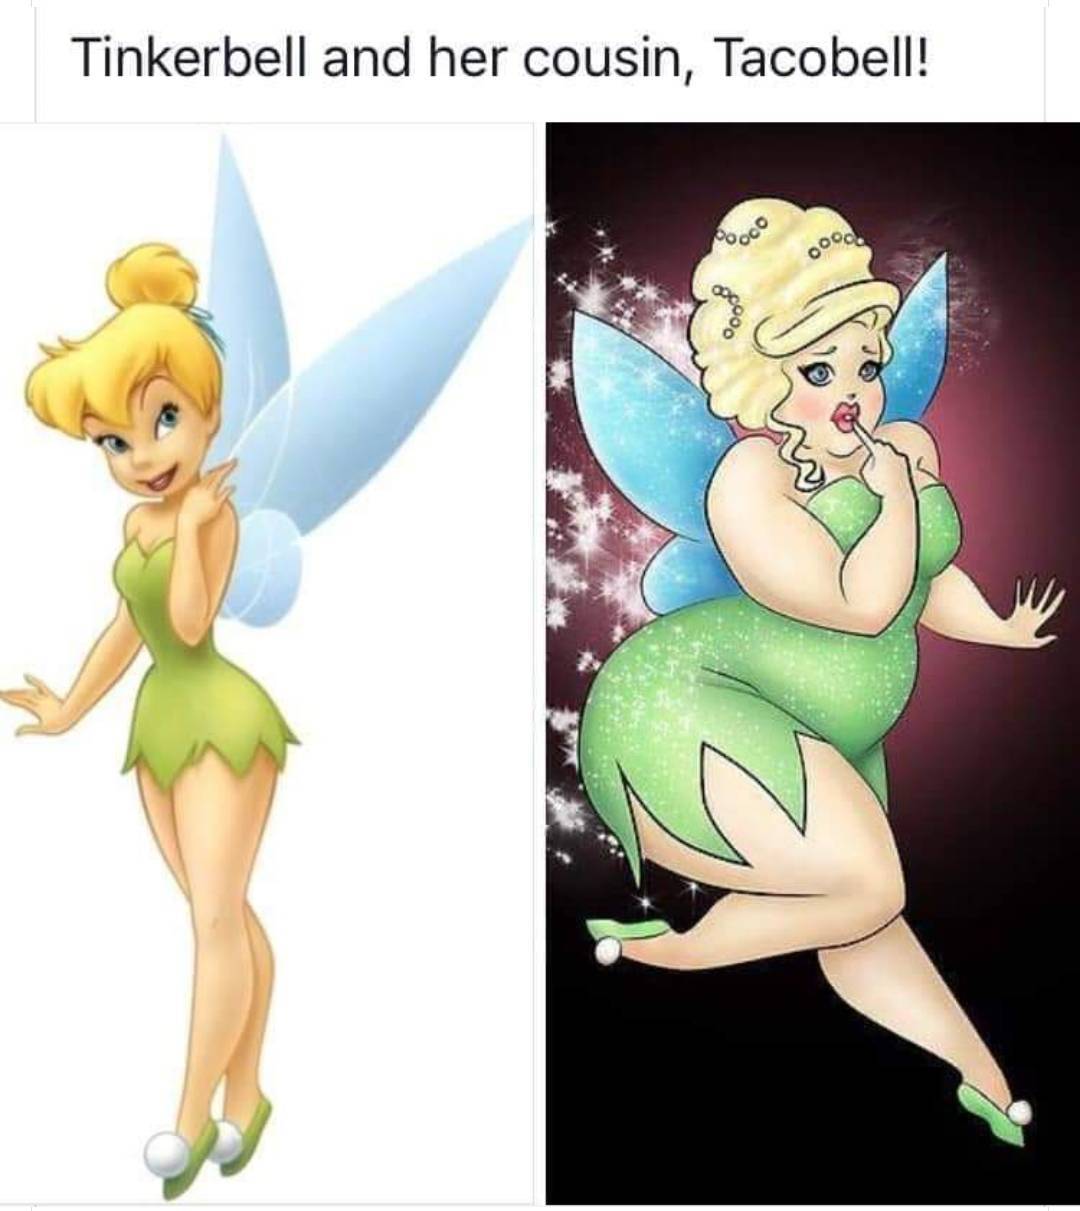 tinkerbell printable - Tinkerbell and her cousin, Tacobell! 000